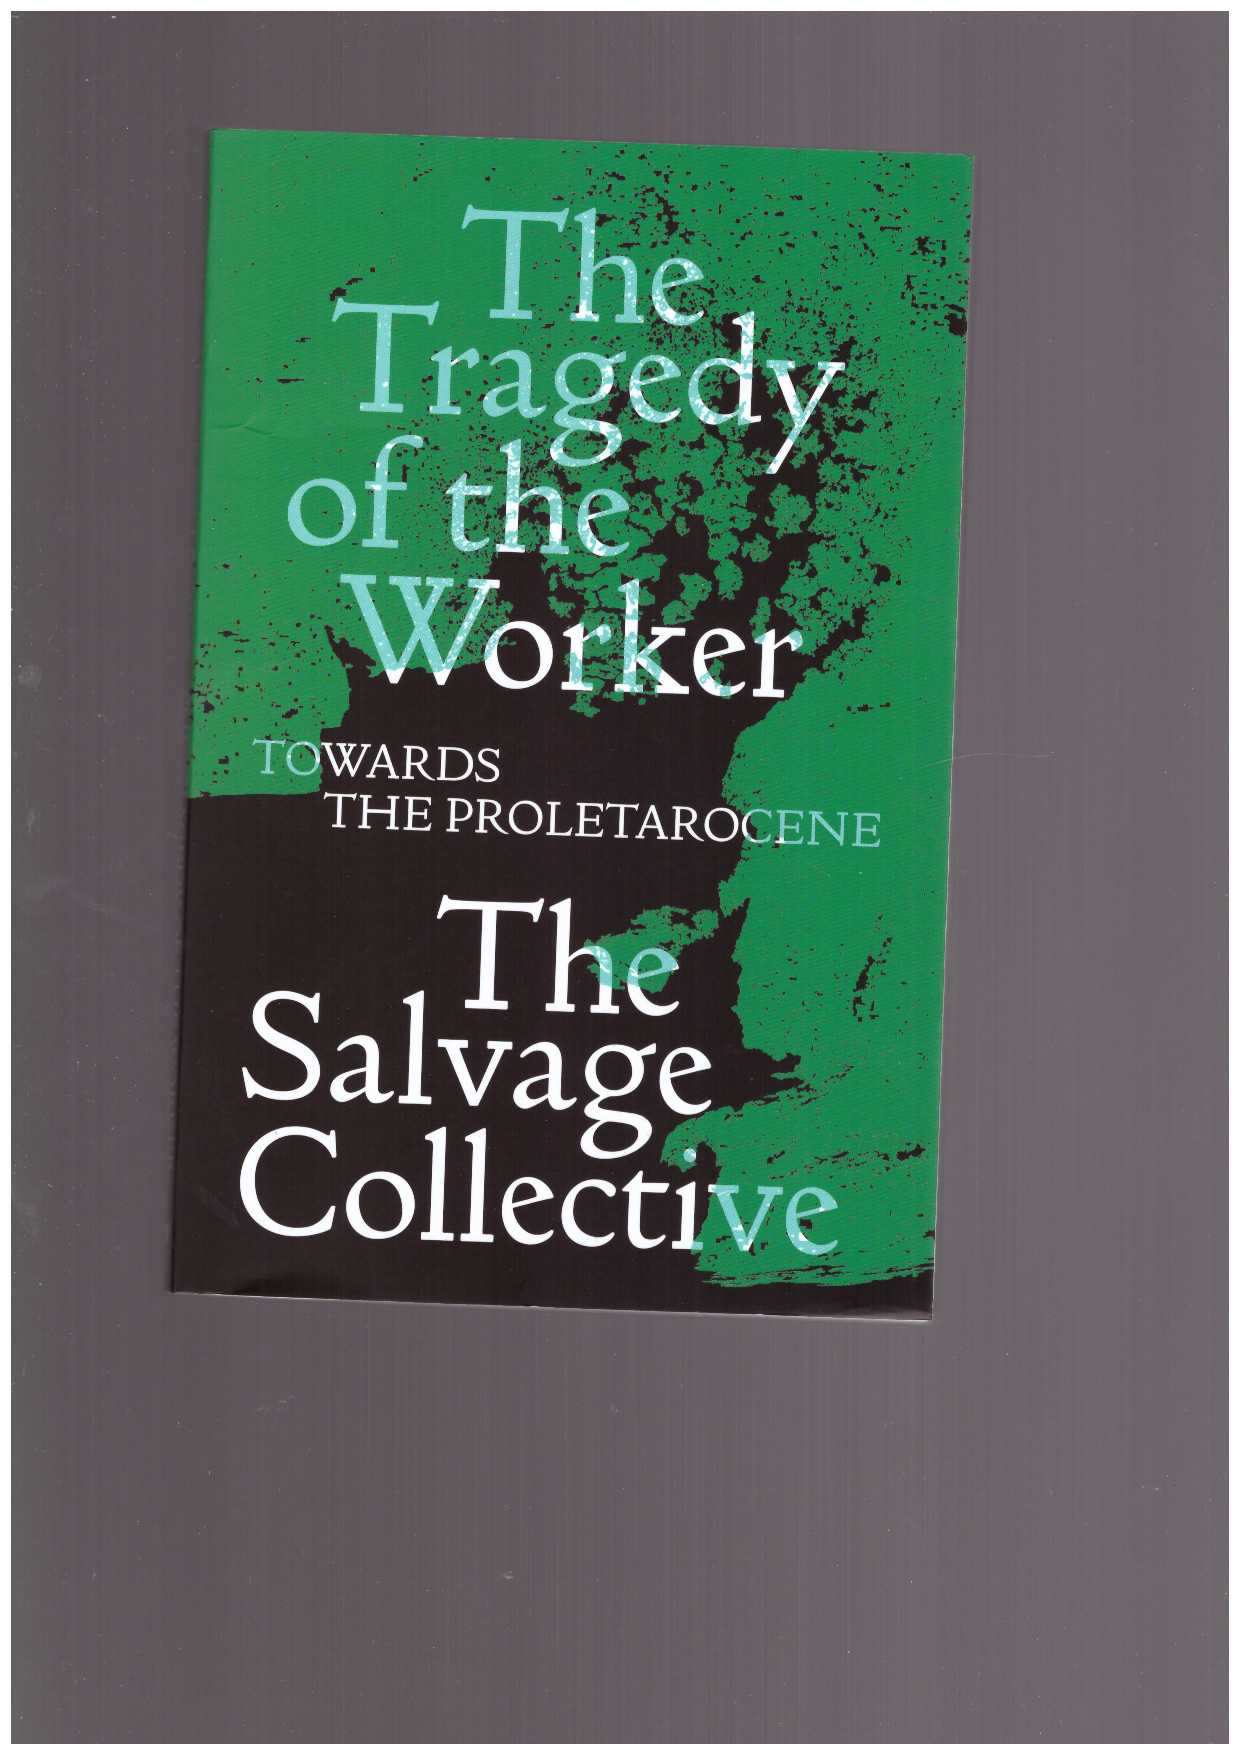 The Salvage Collective - The Tragedy of the Worker. Towards the Proletarocene